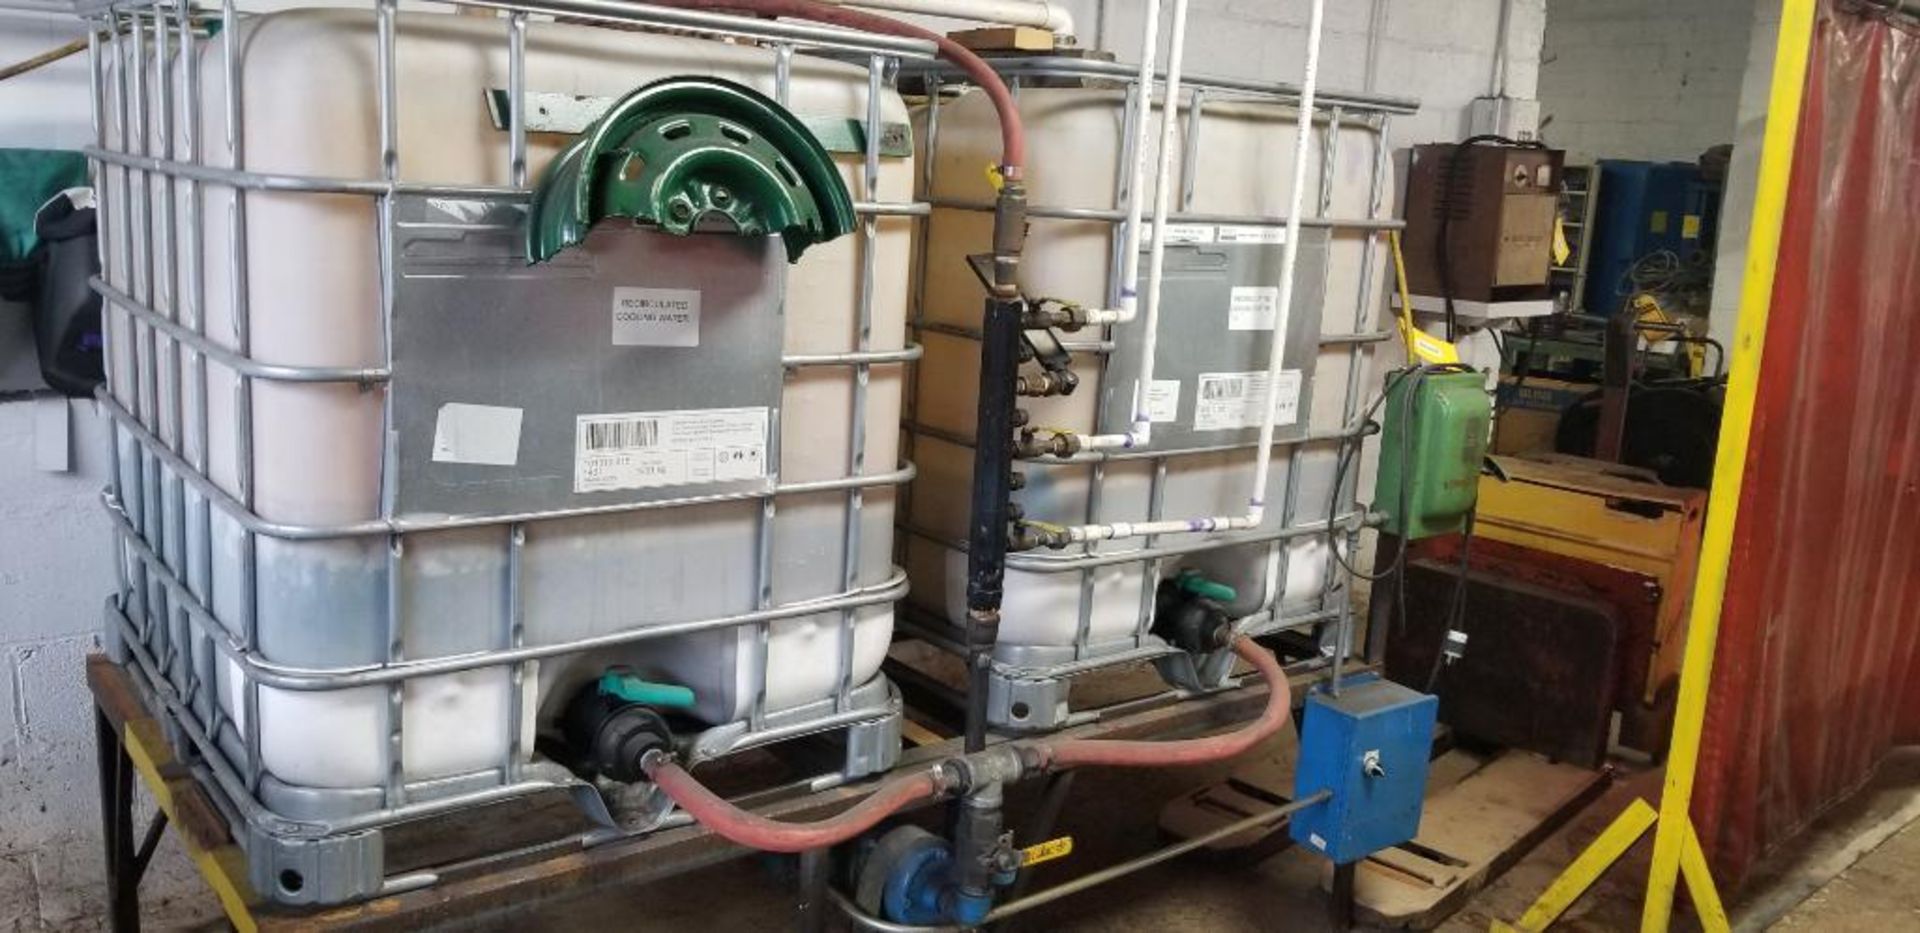 IBC Tote Pump System, Closed Loop Water Cooling System for Transformer on Spot Welders & Projection - Image 2 of 3